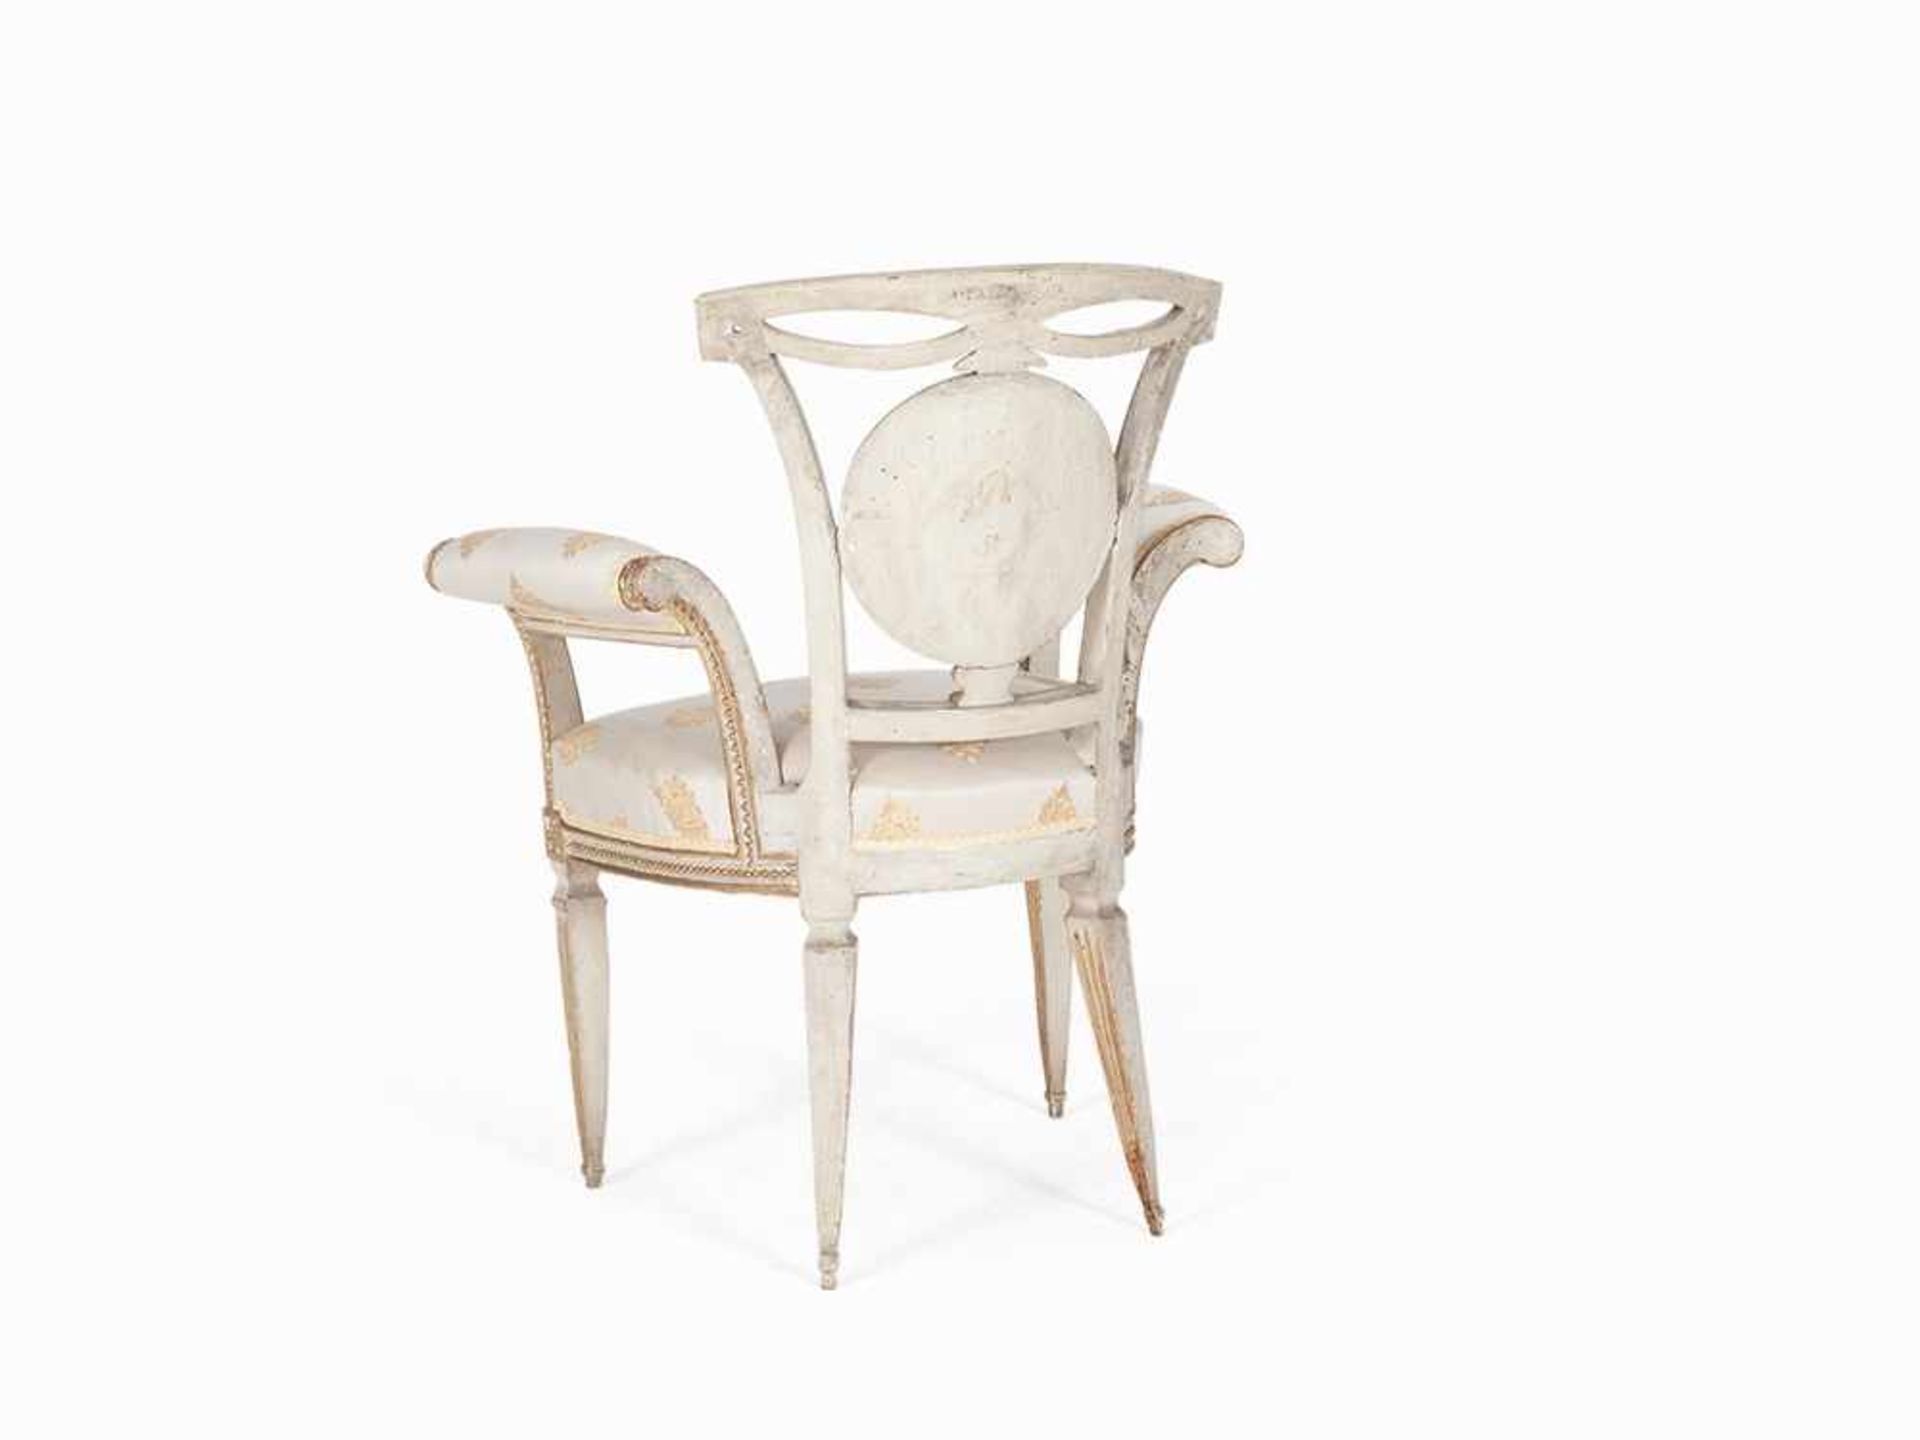 Pair of Armchairs, Lucca, around 1790 Solid wood, carved, white painted and partial gold-plated, - Image 10 of 10